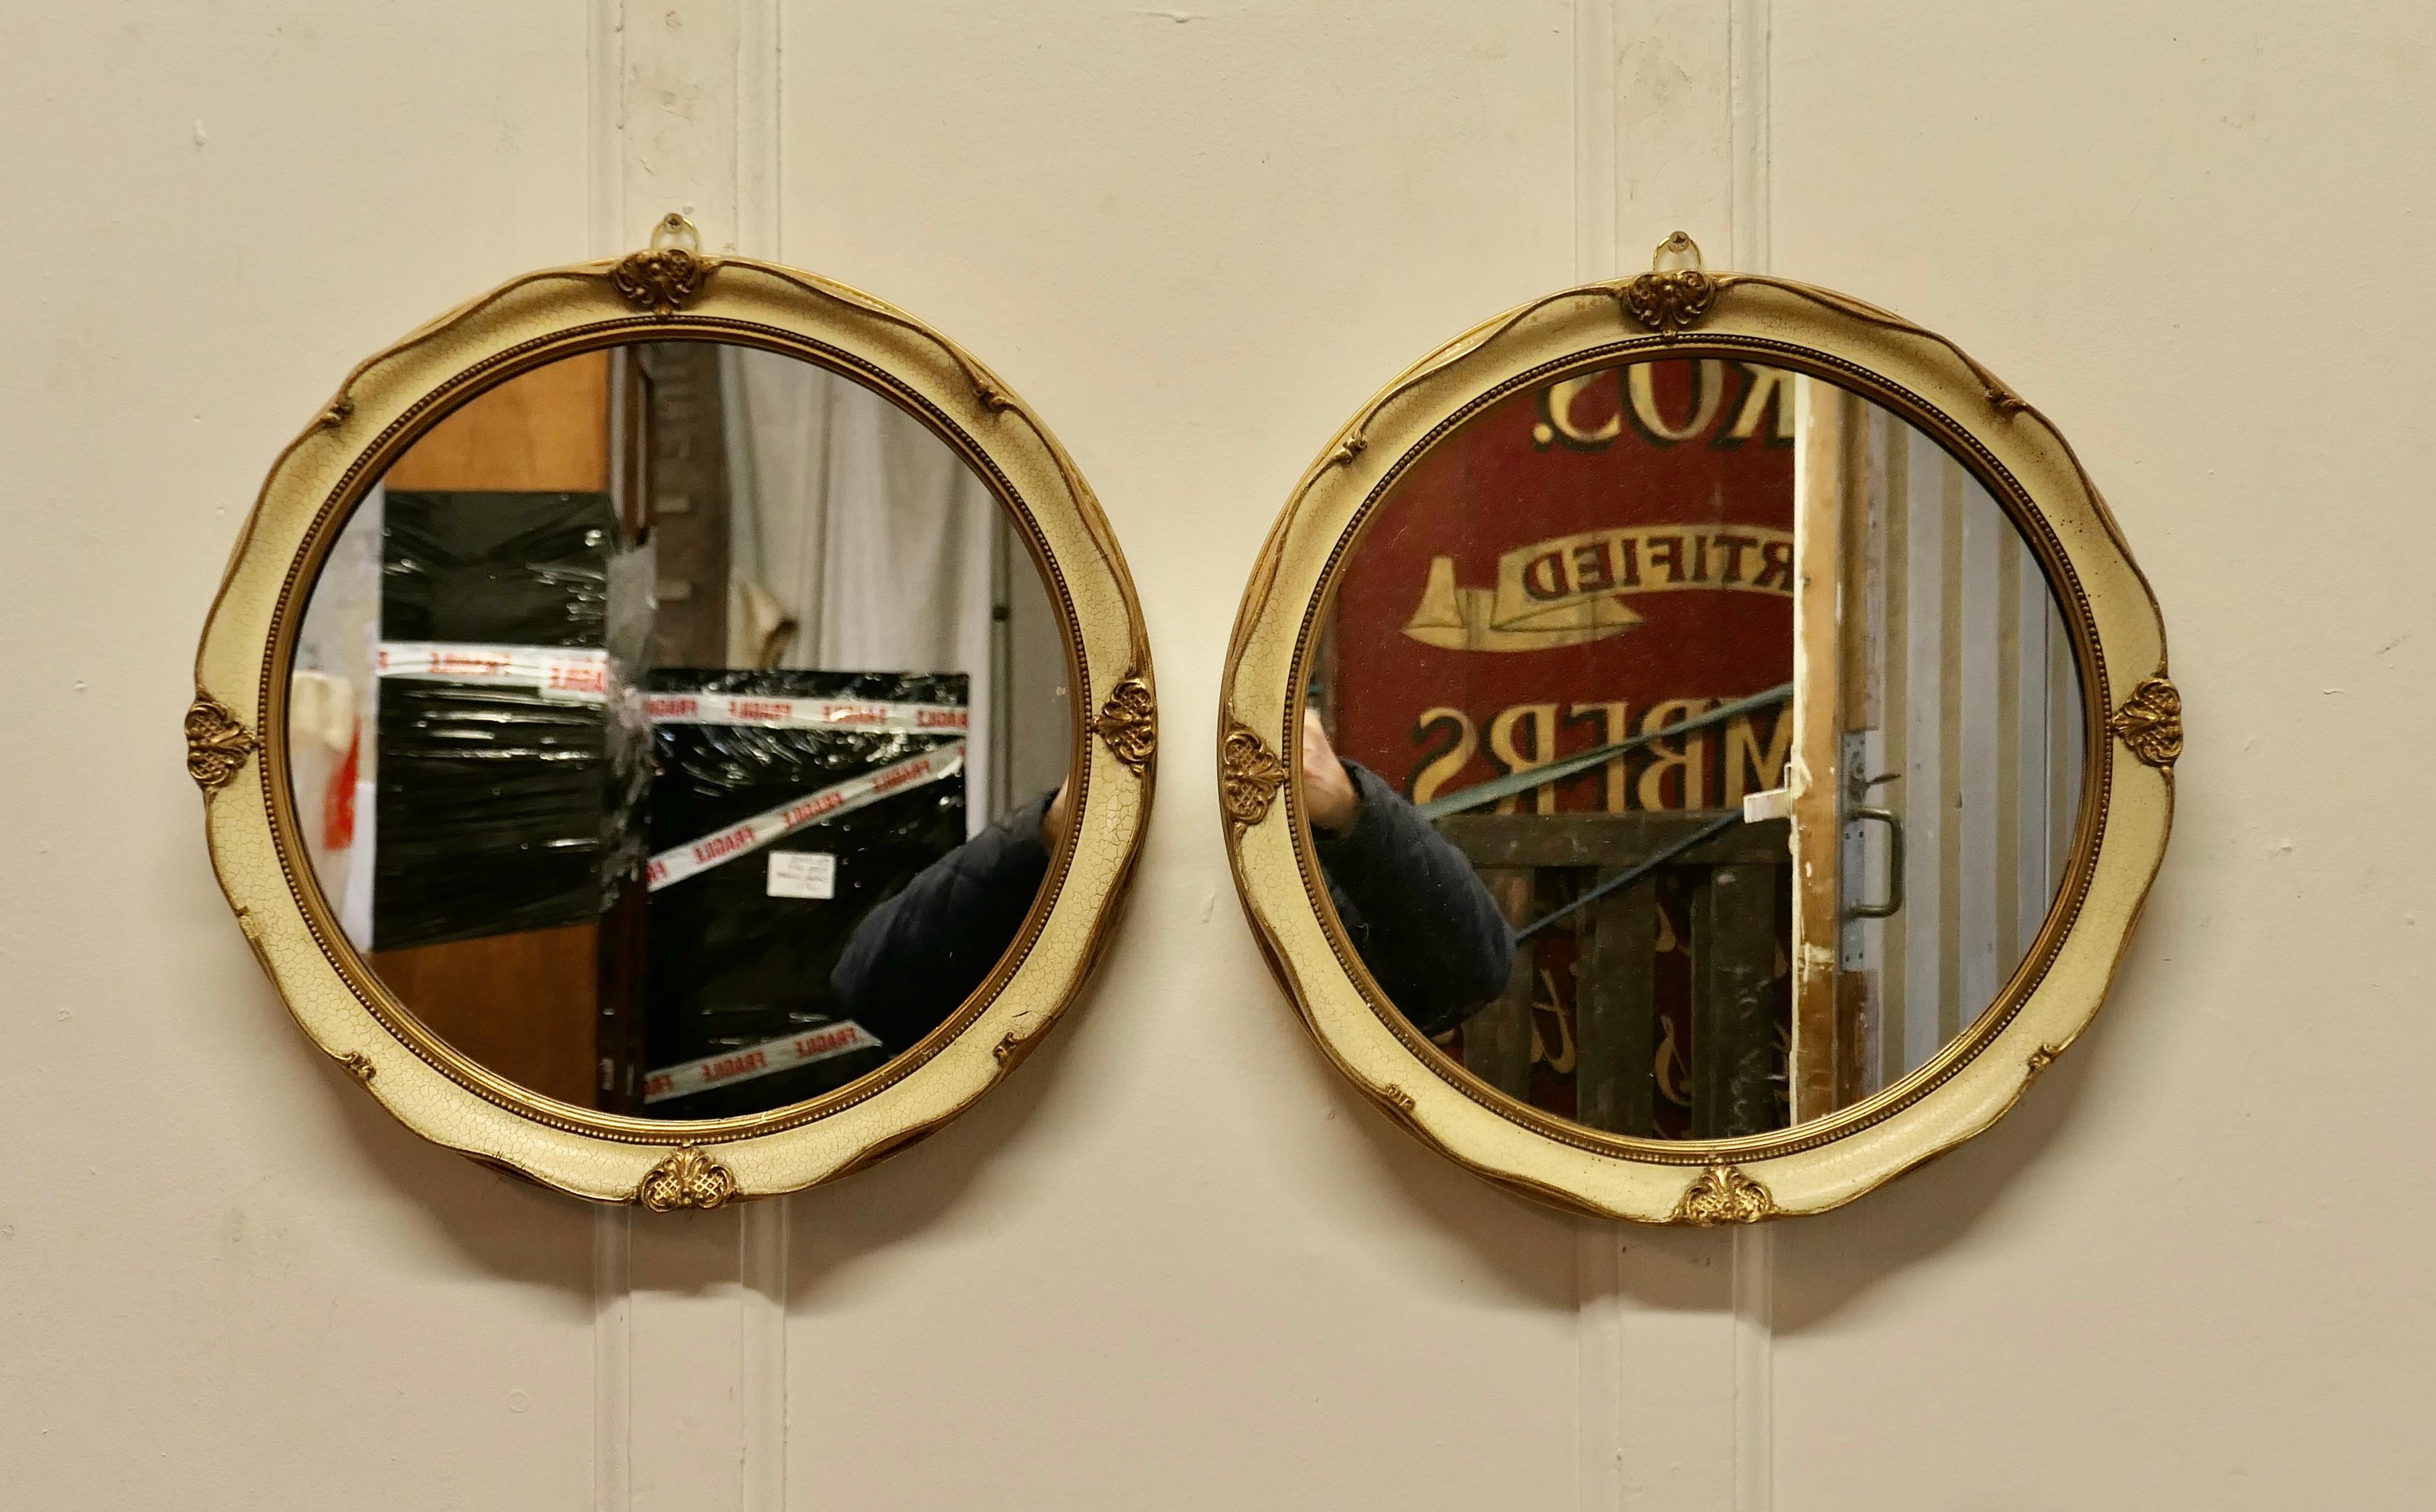 A Pair of French Gilt and Cream Crackle Finish Wall Mirrors

It is unusual to find a pair like this, the mirrors have a decorative cream crackle finish and Gilt frame 
The have a 1.5” wide frame they are in good condition with very minor dings

The